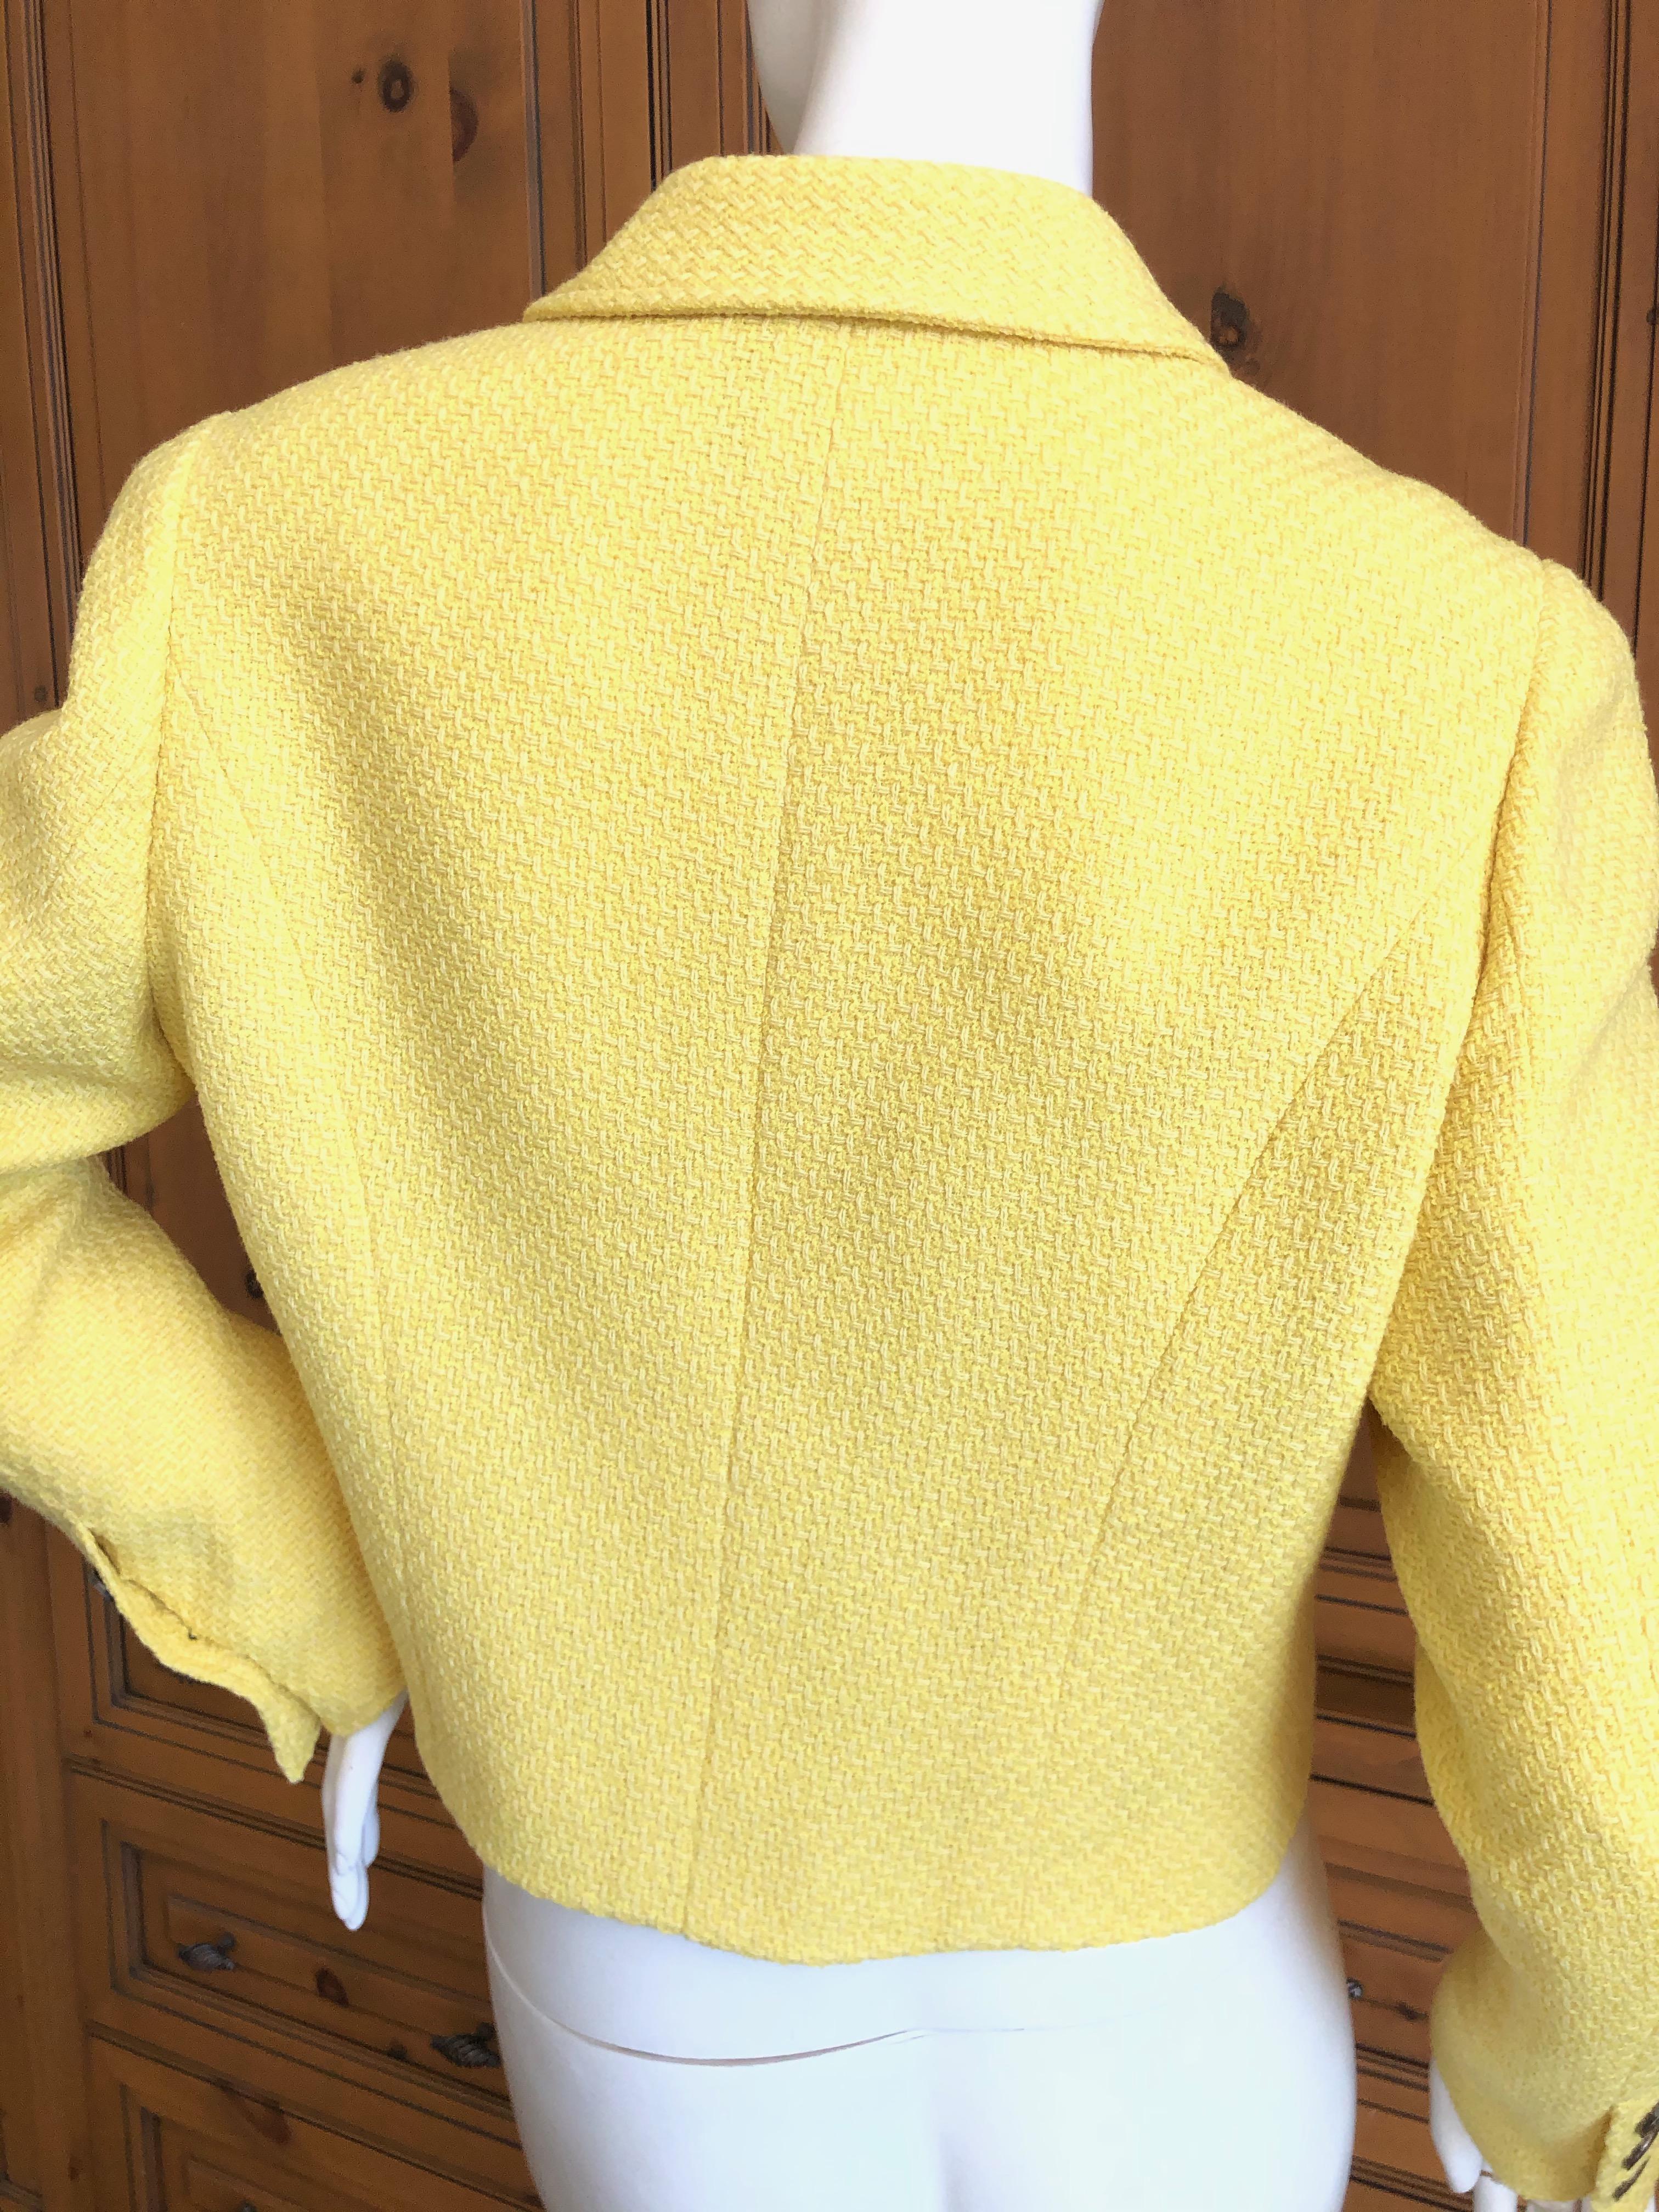 Chanel  Vintage Cropped Yellow Boucle Jacket w CC buttons and Chain Weighted Hem In Excellent Condition For Sale In Cloverdale, CA